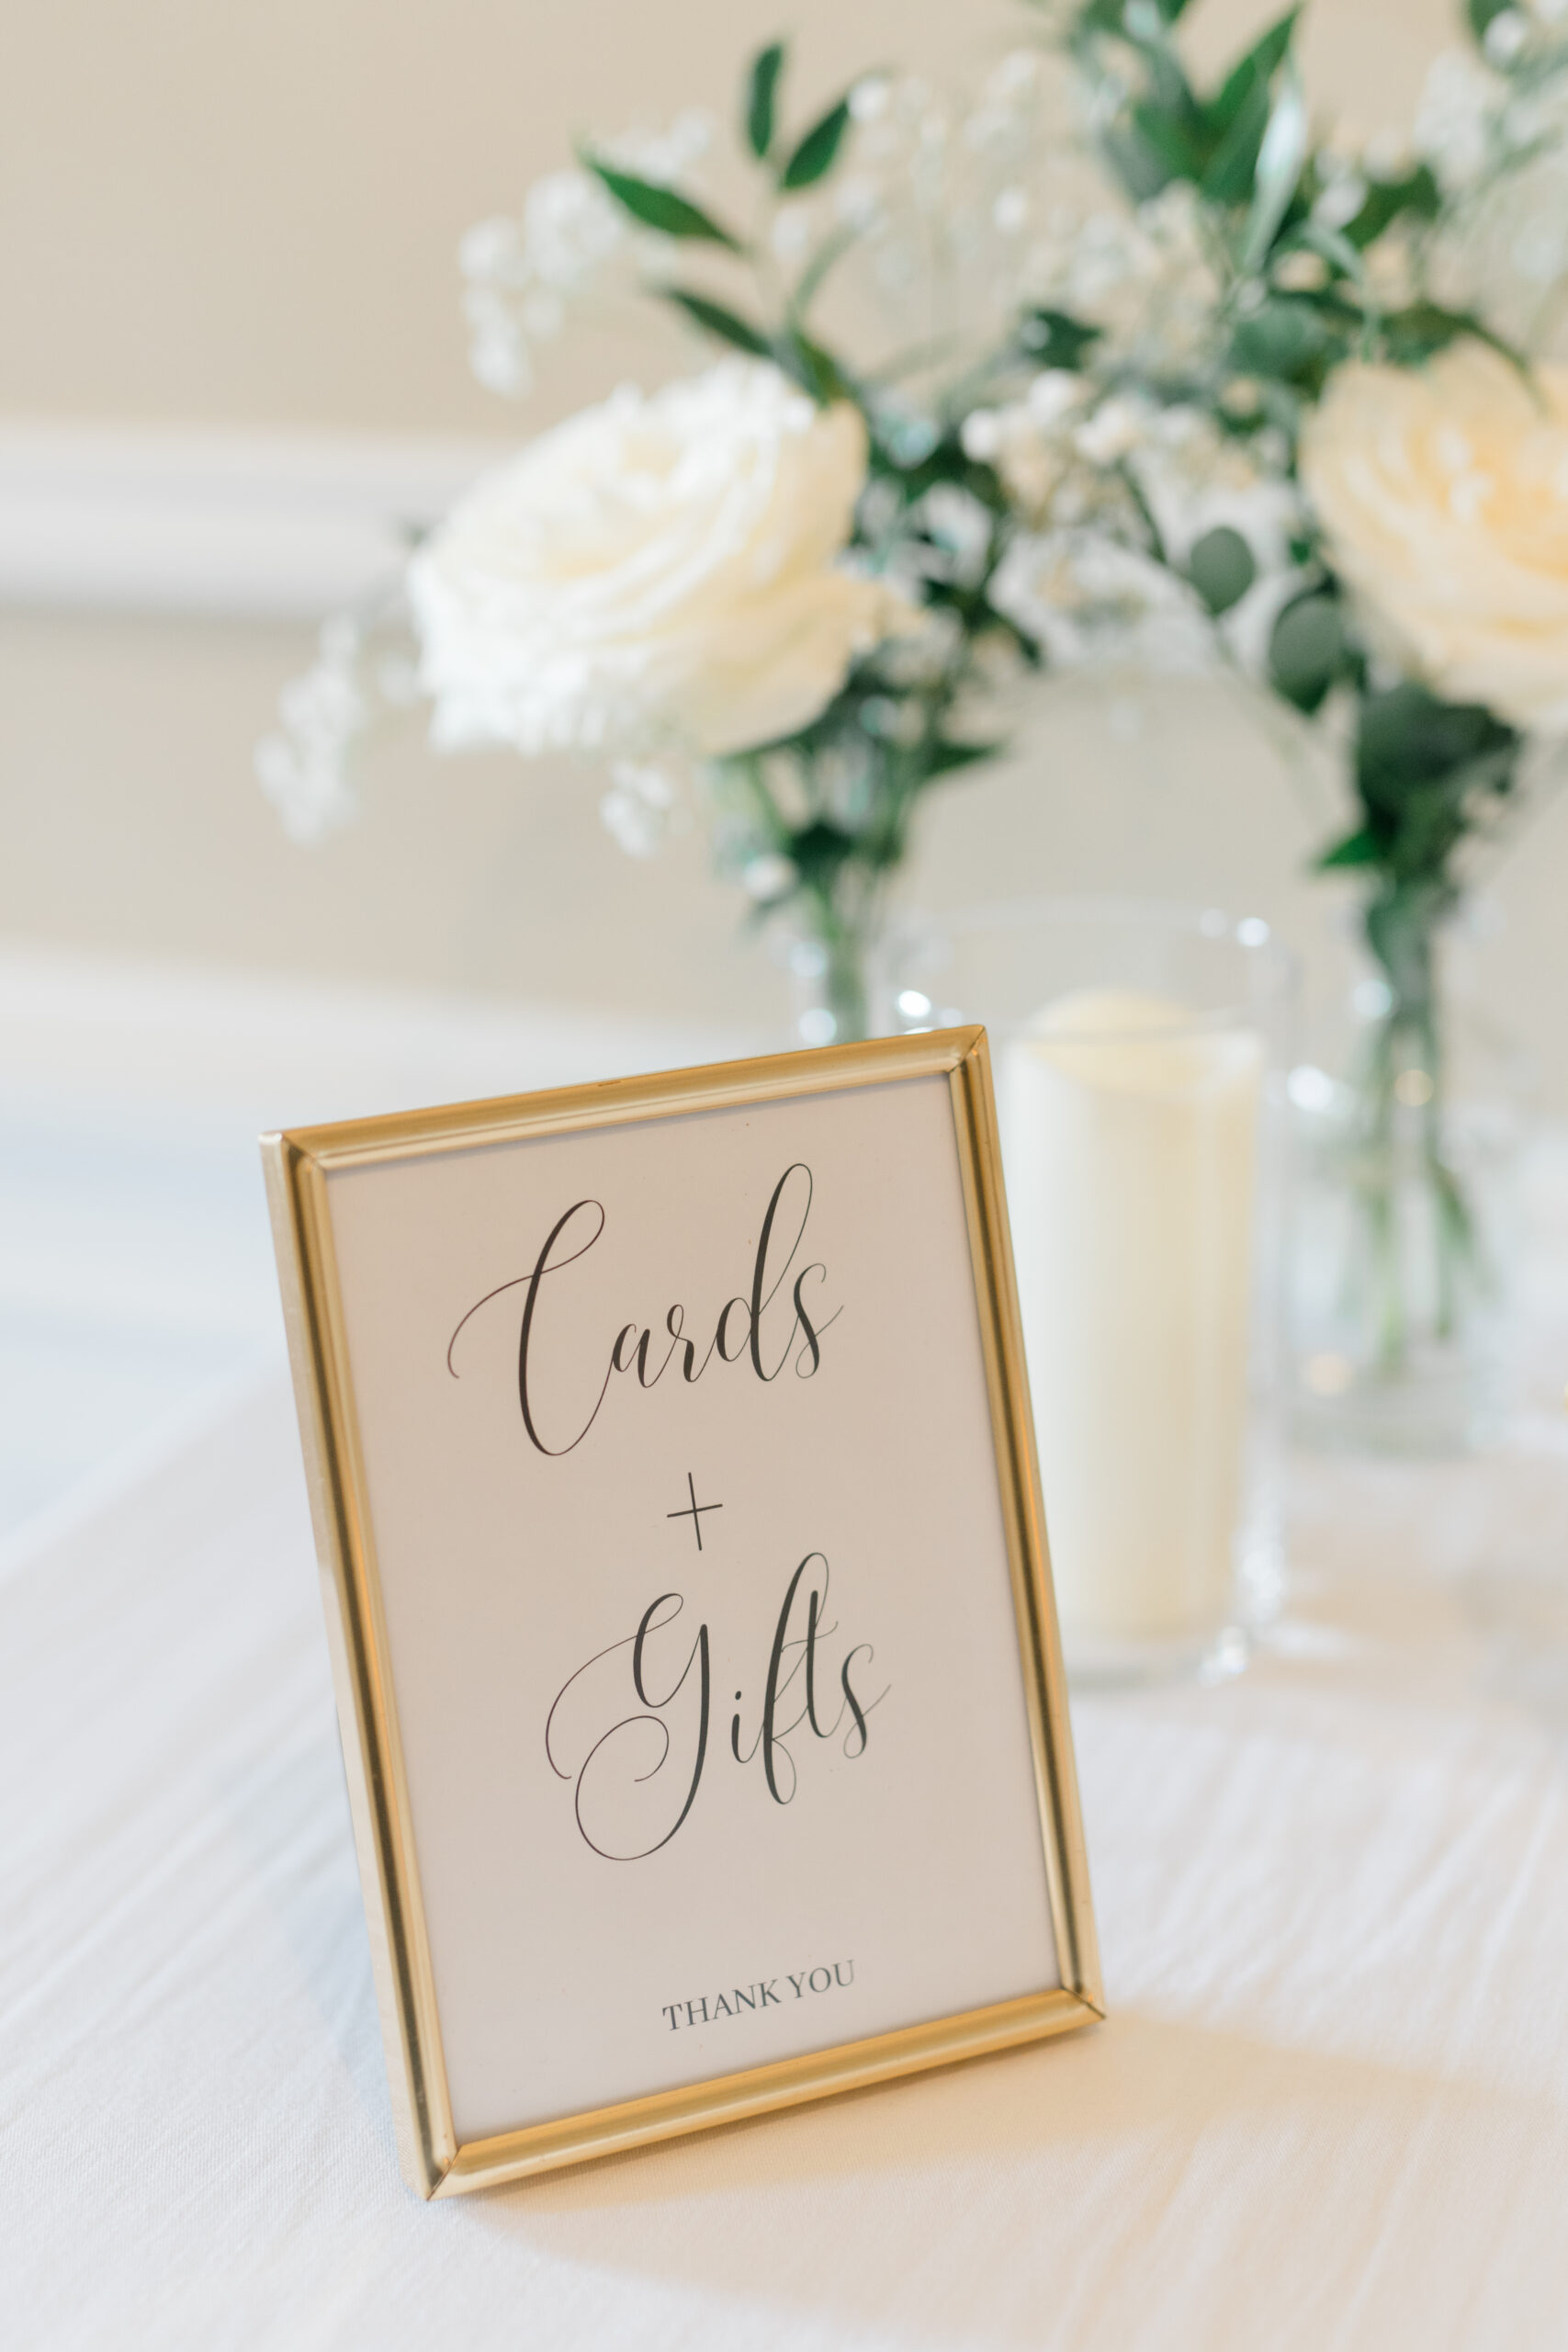 detail shot of "gifts and cards" signage on a gift table at wedding reception